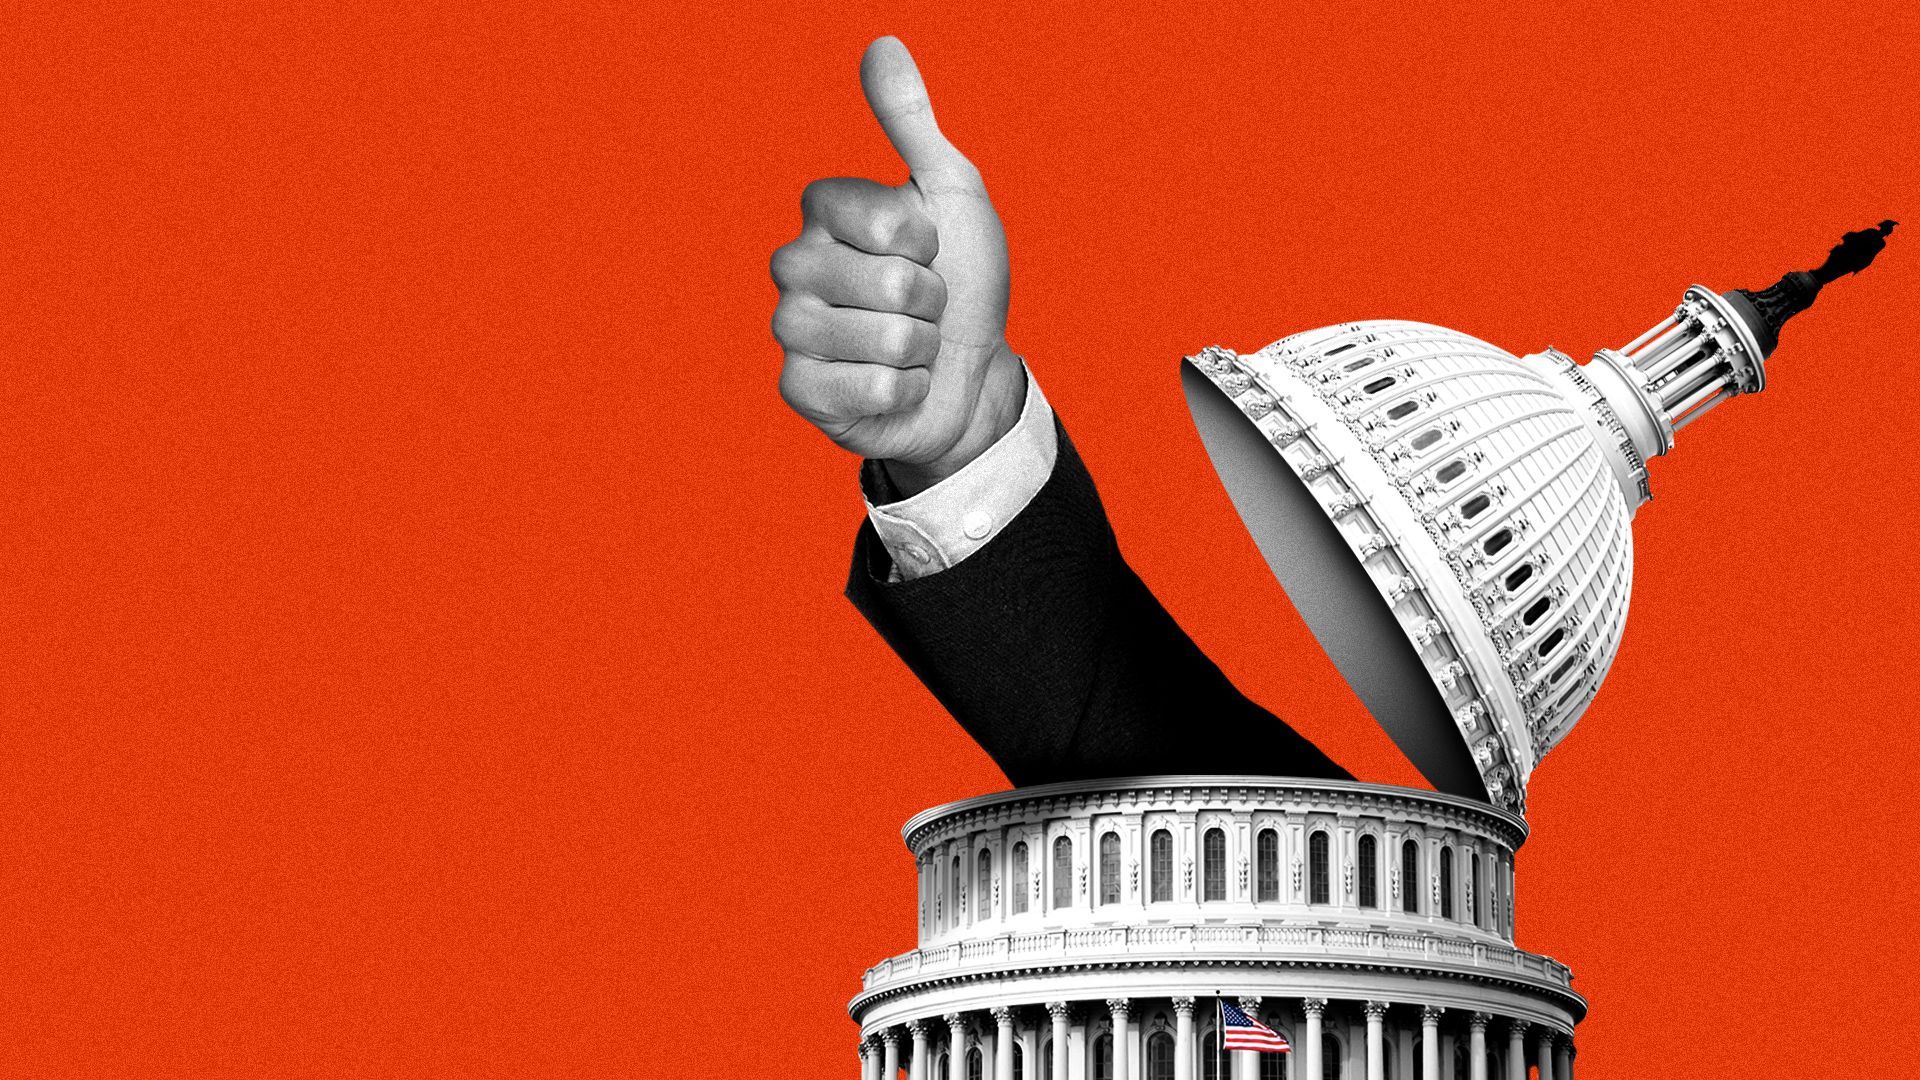 Illustration of a hand emerging from the capitol dome giving a thumbs up hand sign. 